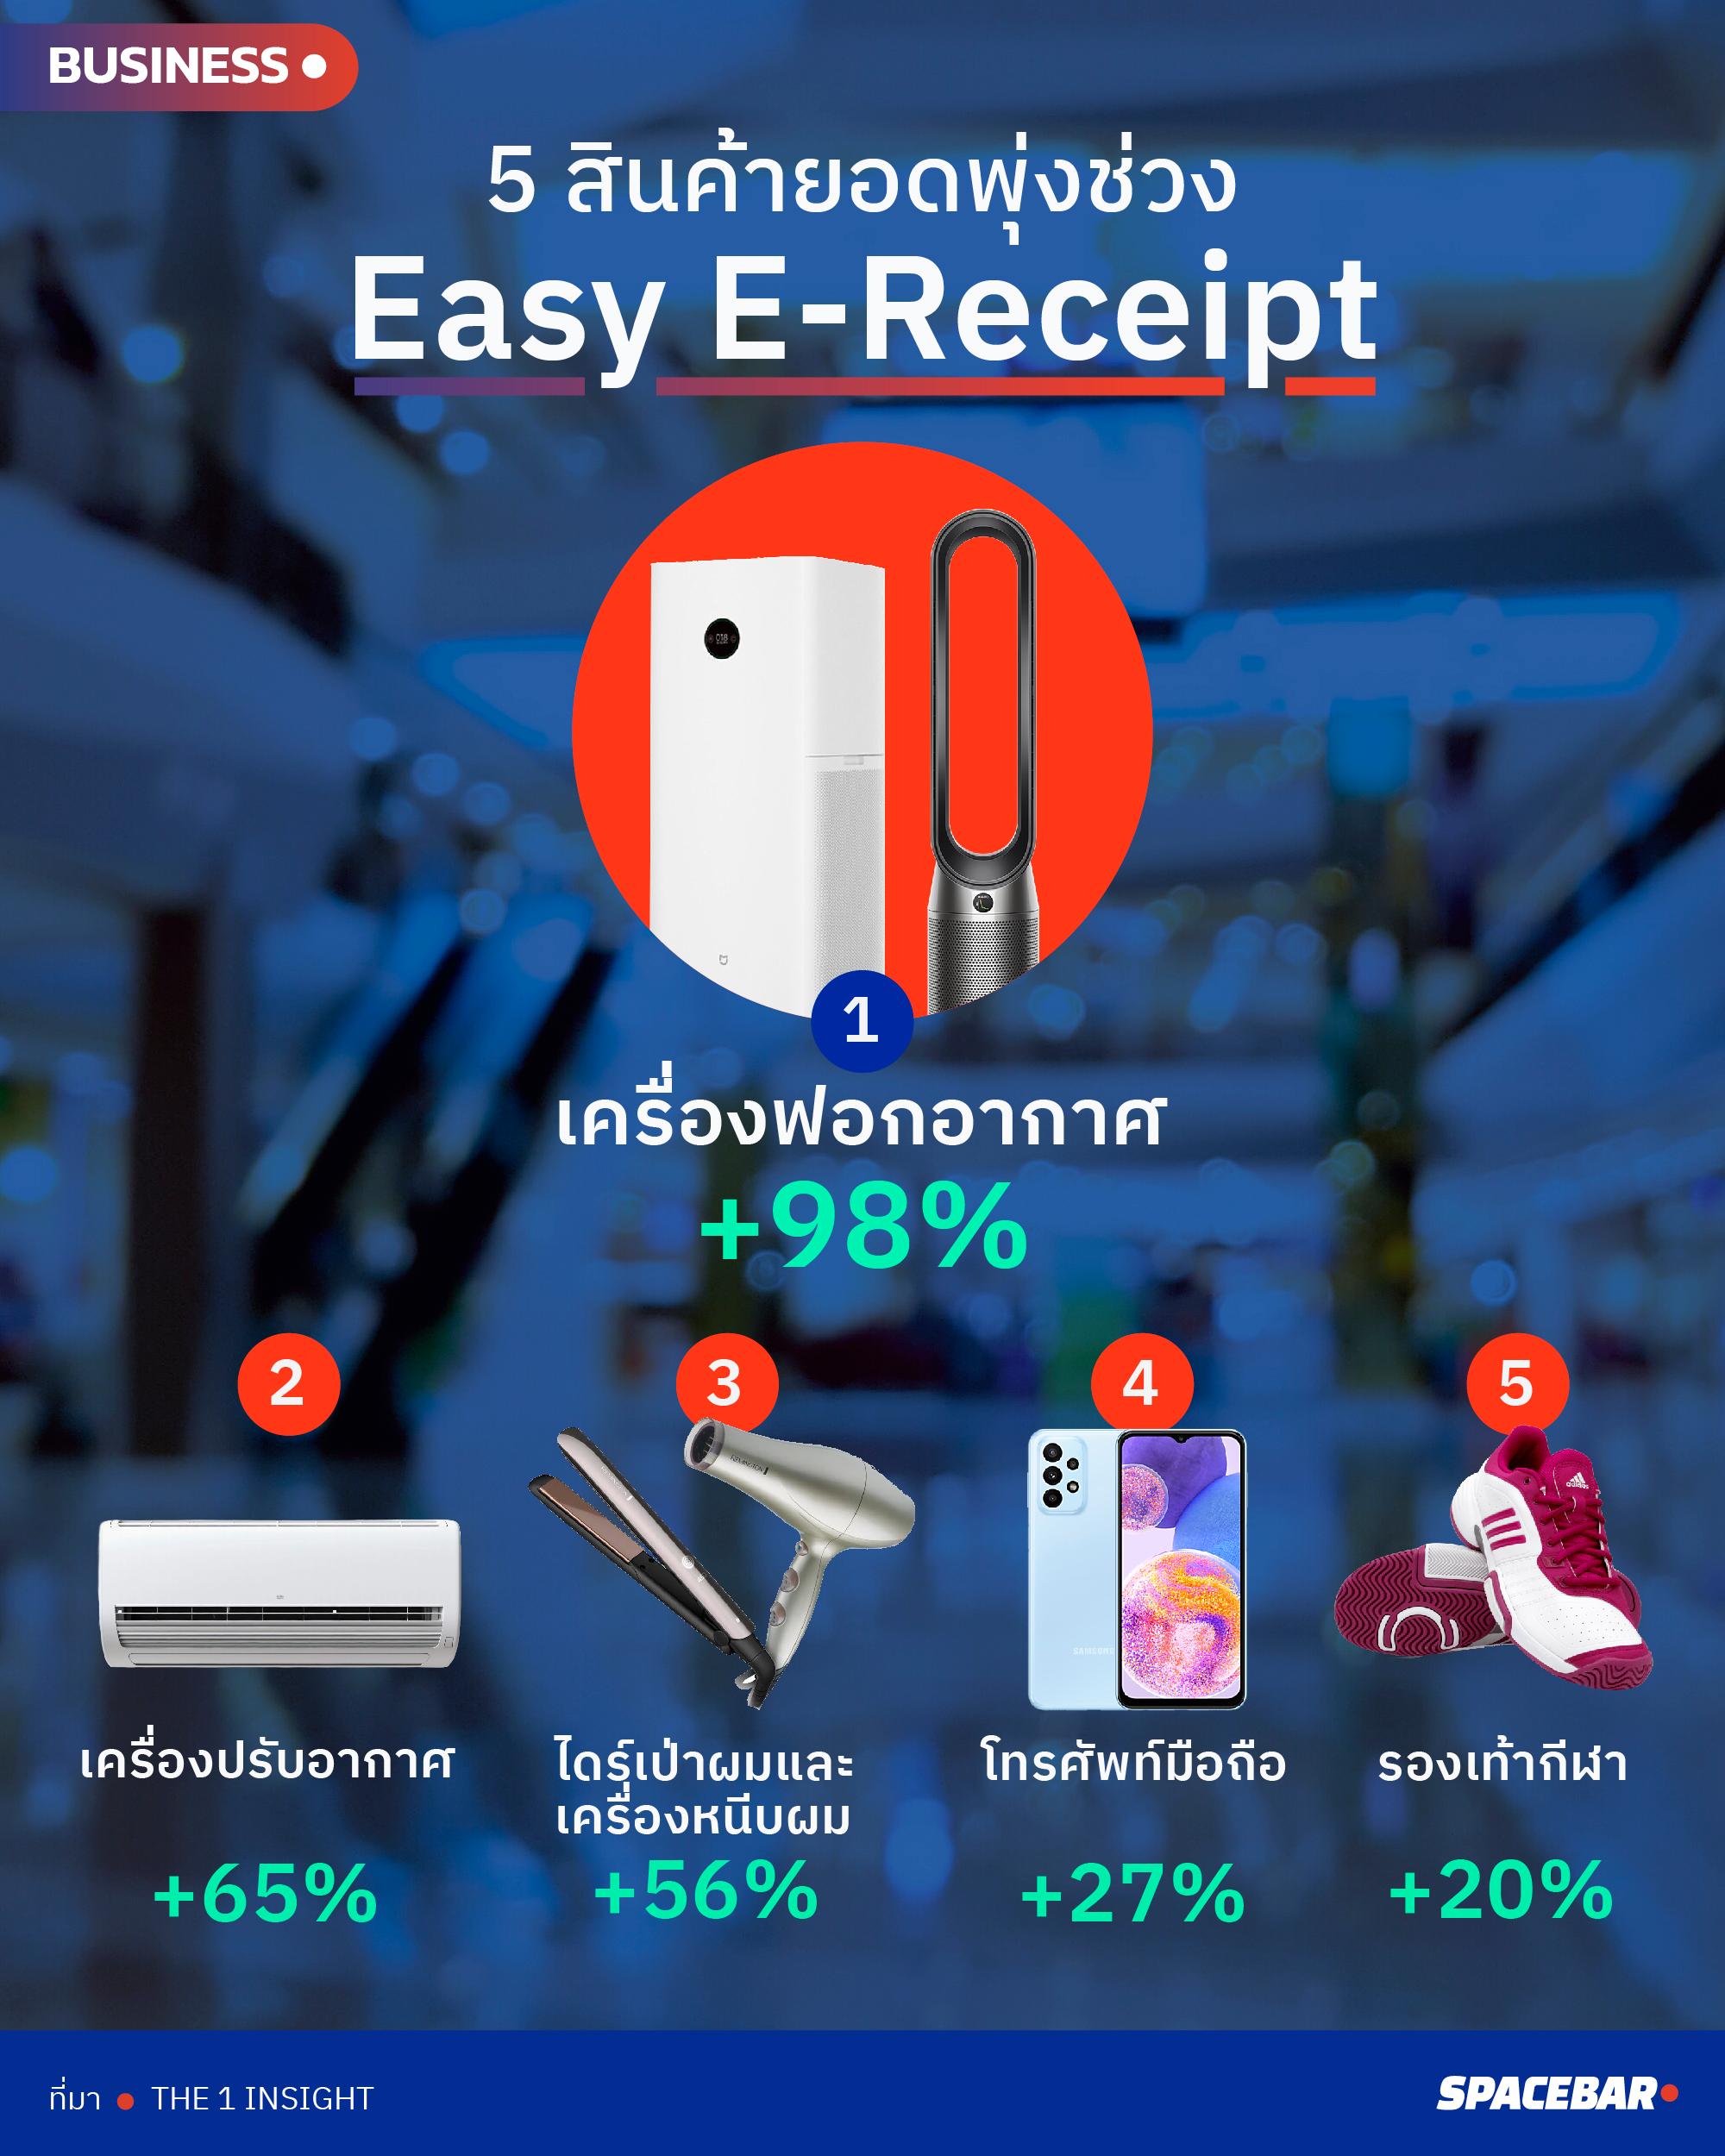 Economy-5-products-that-are-increasing-in- popularity-Easy-E-Receipt-period.jpg